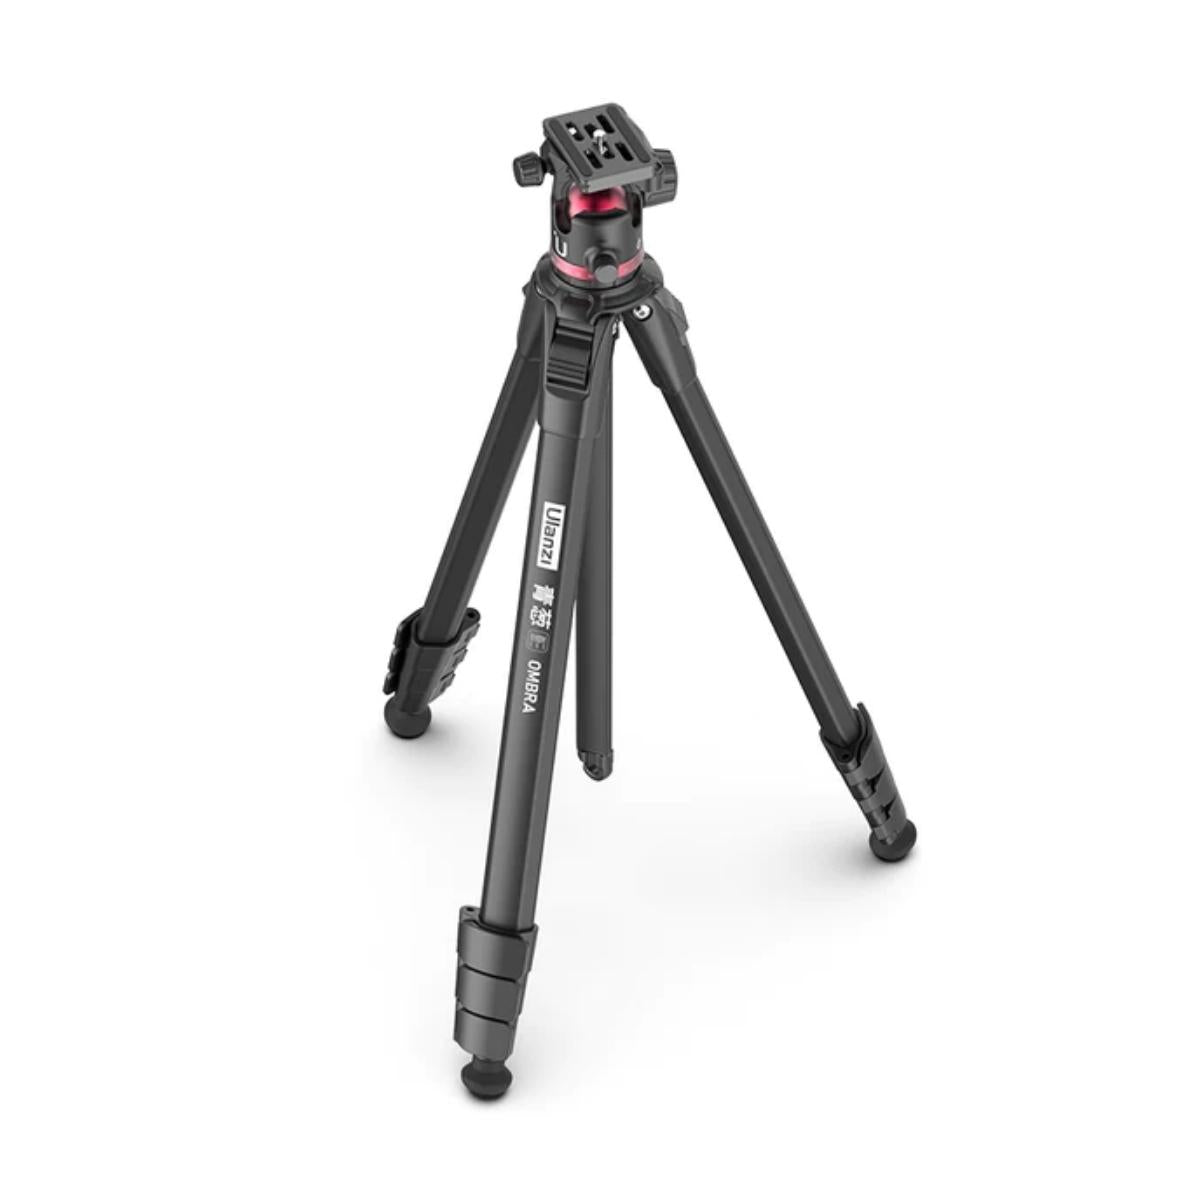 Ulanzi Ombra Video 63-Inch Quick Release Travel Tripod with 8kg Load Capacity, 360 Degree Rotatable, Smartphone Holder, Carrying Bag | 3029